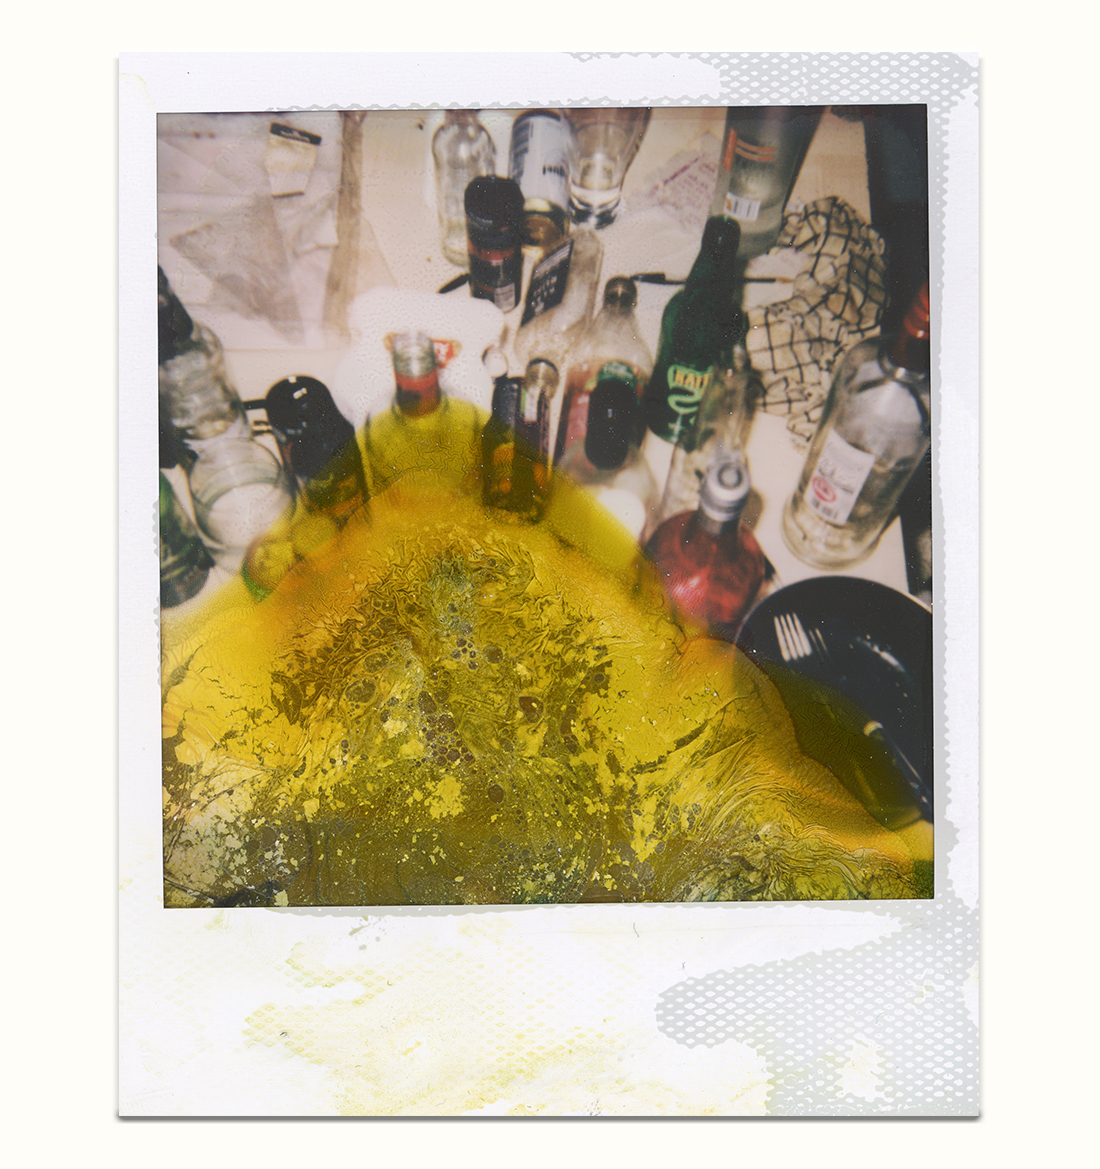 White frame Polaroid Instant Film 600 with lime green liquid and chemical deterioration from the bottom featuring dirty table with alcohol containers.